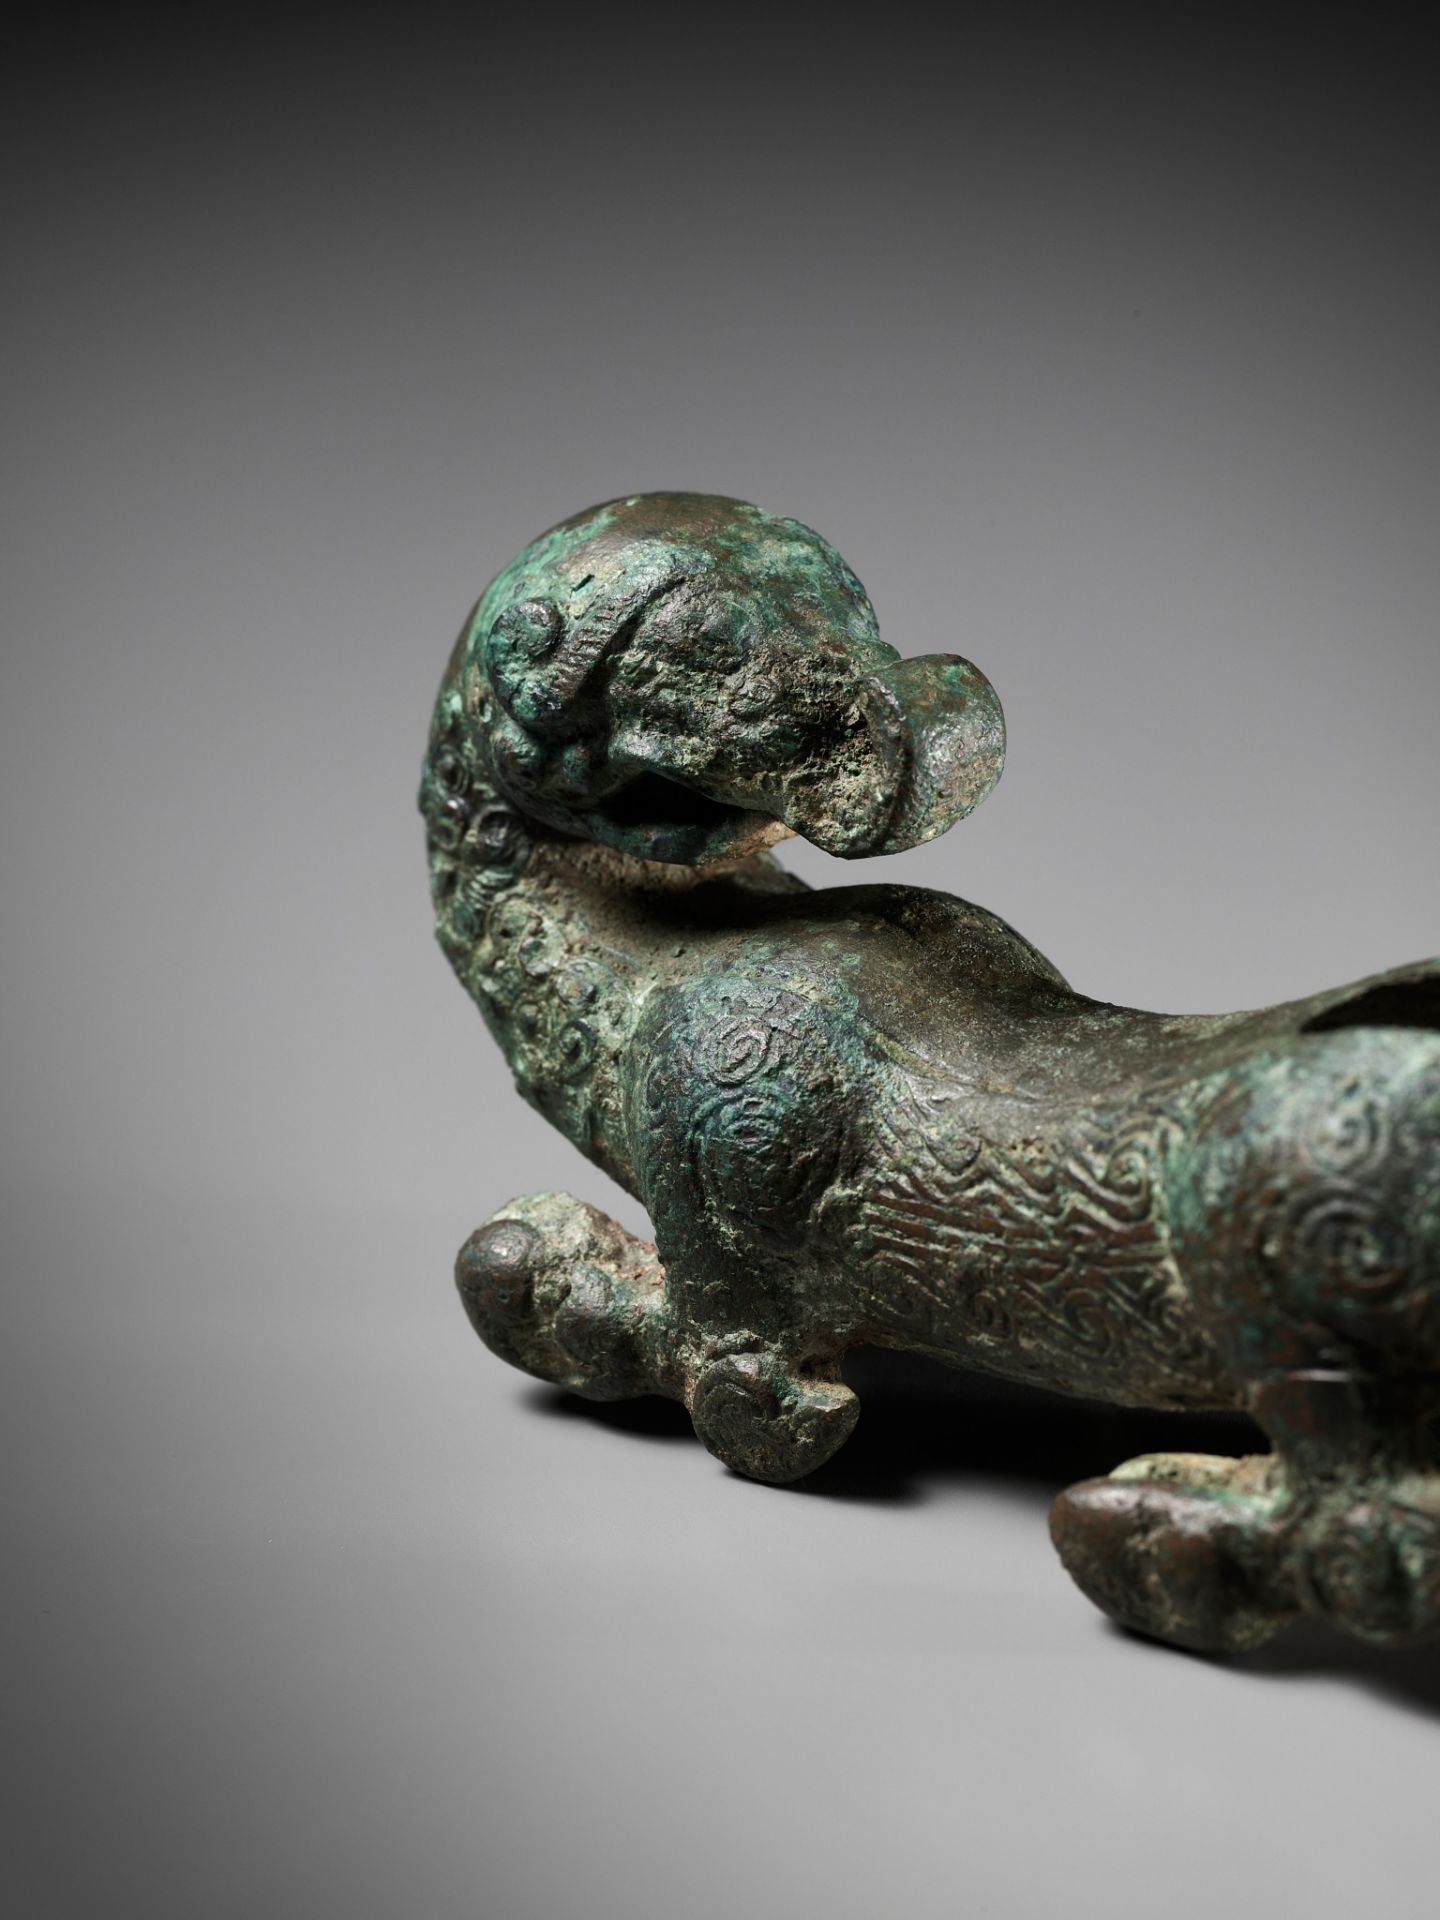 A SUPERB BRONZE FIGURE OF A DRAGON, EASTERN ZHOU DYNASTY, CHINA, 770-256 BC - Image 17 of 25